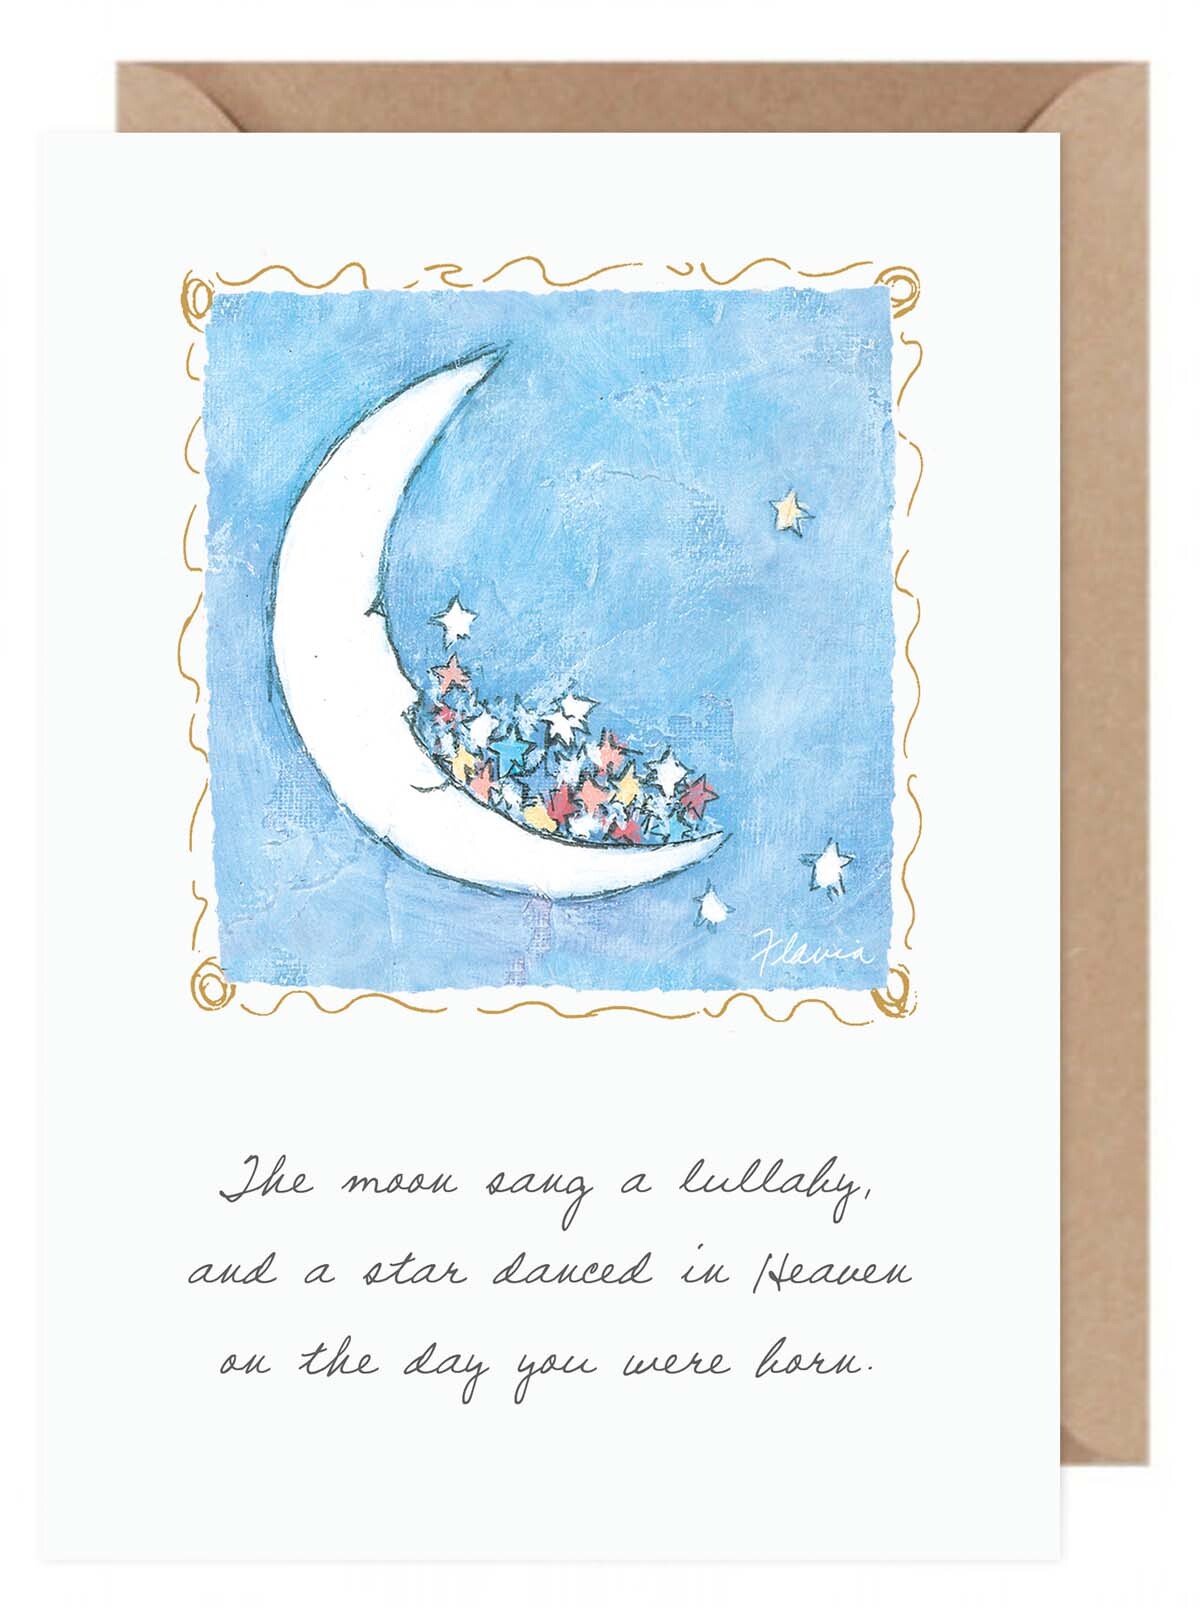 Moon Sang a Lullaby  - a Flavia Weedn inspirational greeting card  0003-2183